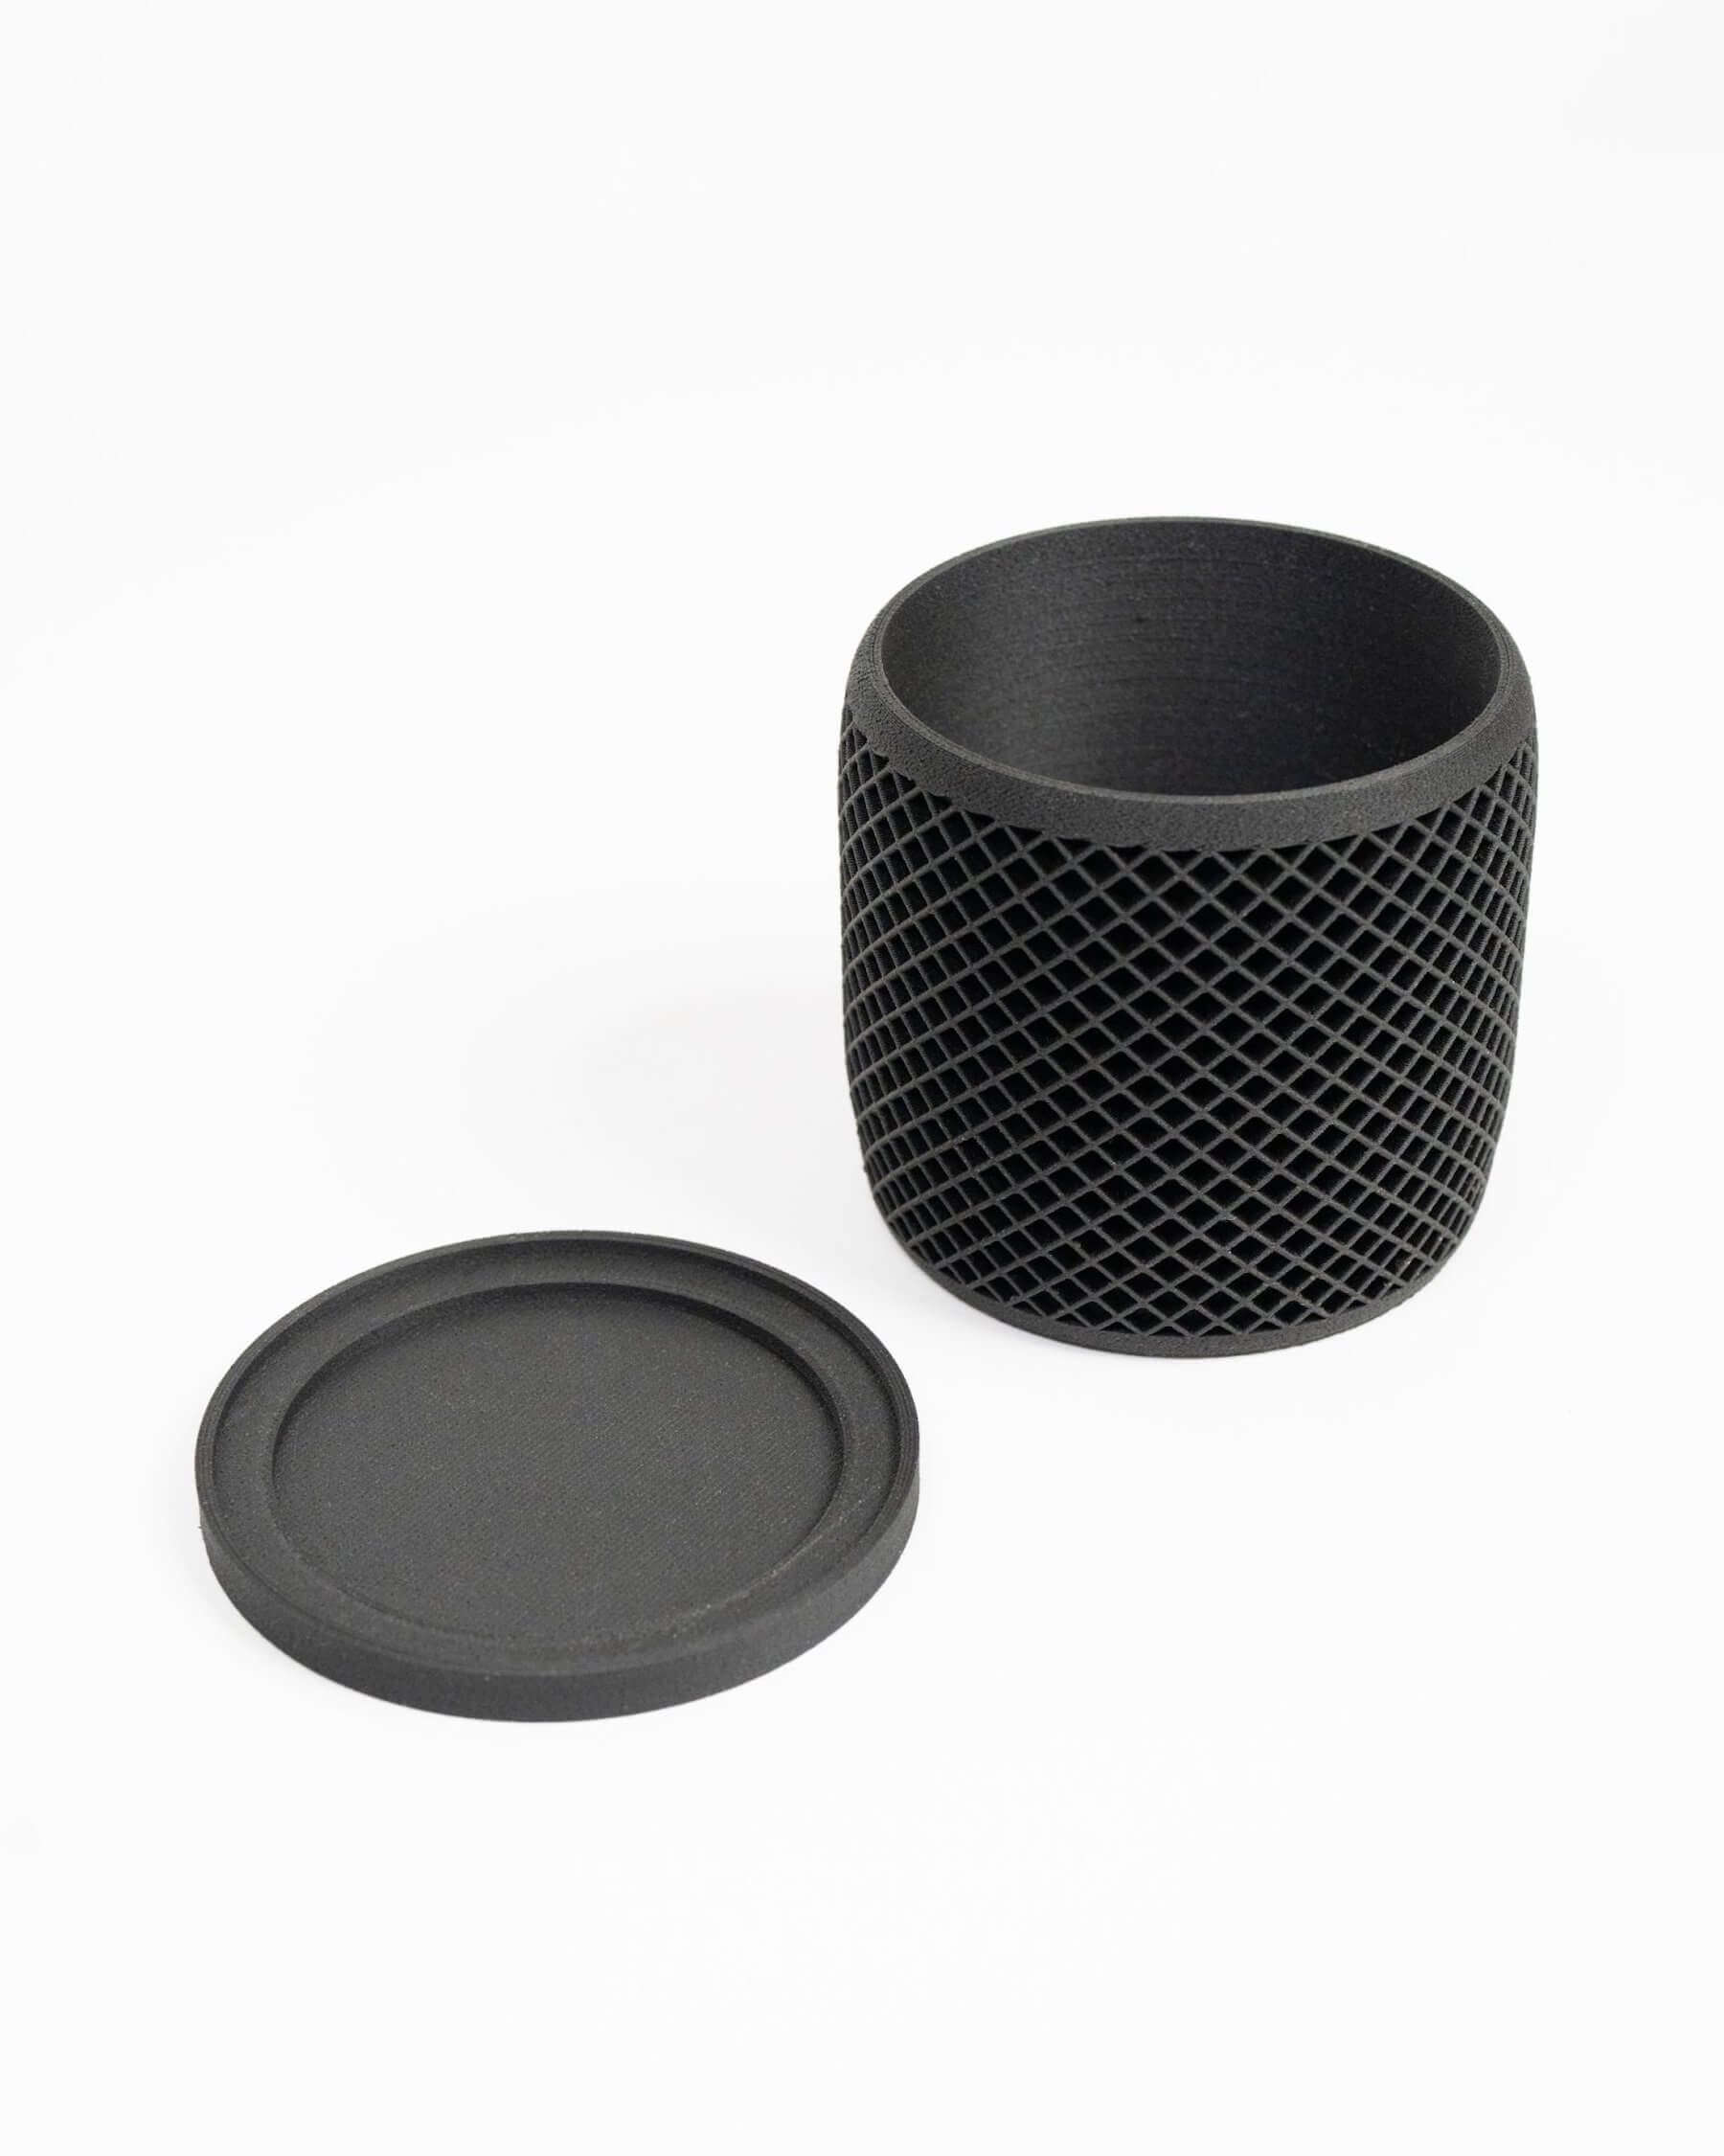 VISION black planter pot by Woodland Pulse. This is a geometric planter with a matching saucer.